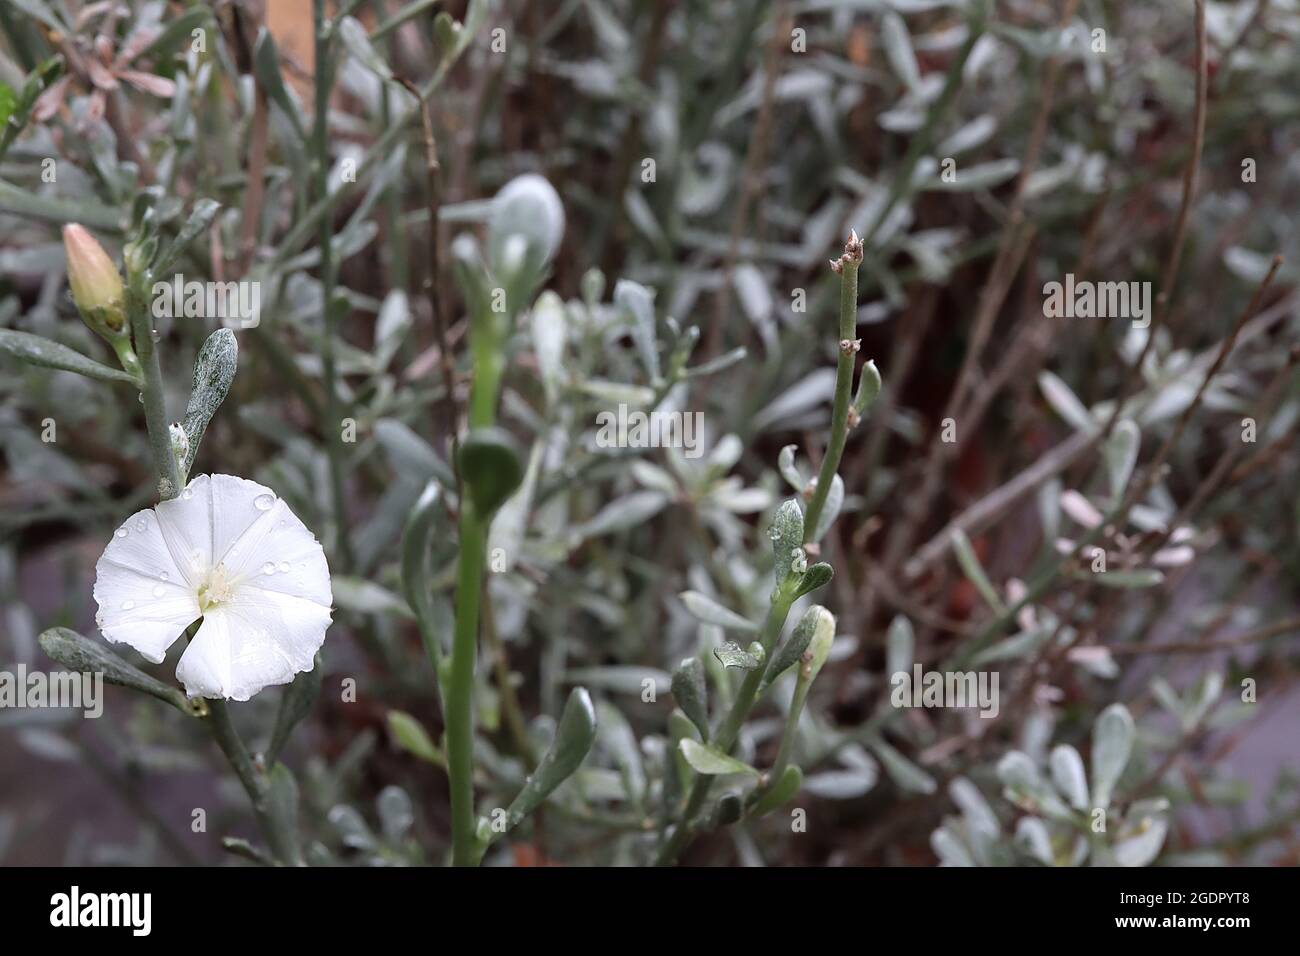 Convolvulus caput-medusae Round white flowers and spatulate blue green leaves and tall stems,  July, England, UK Stock Photo